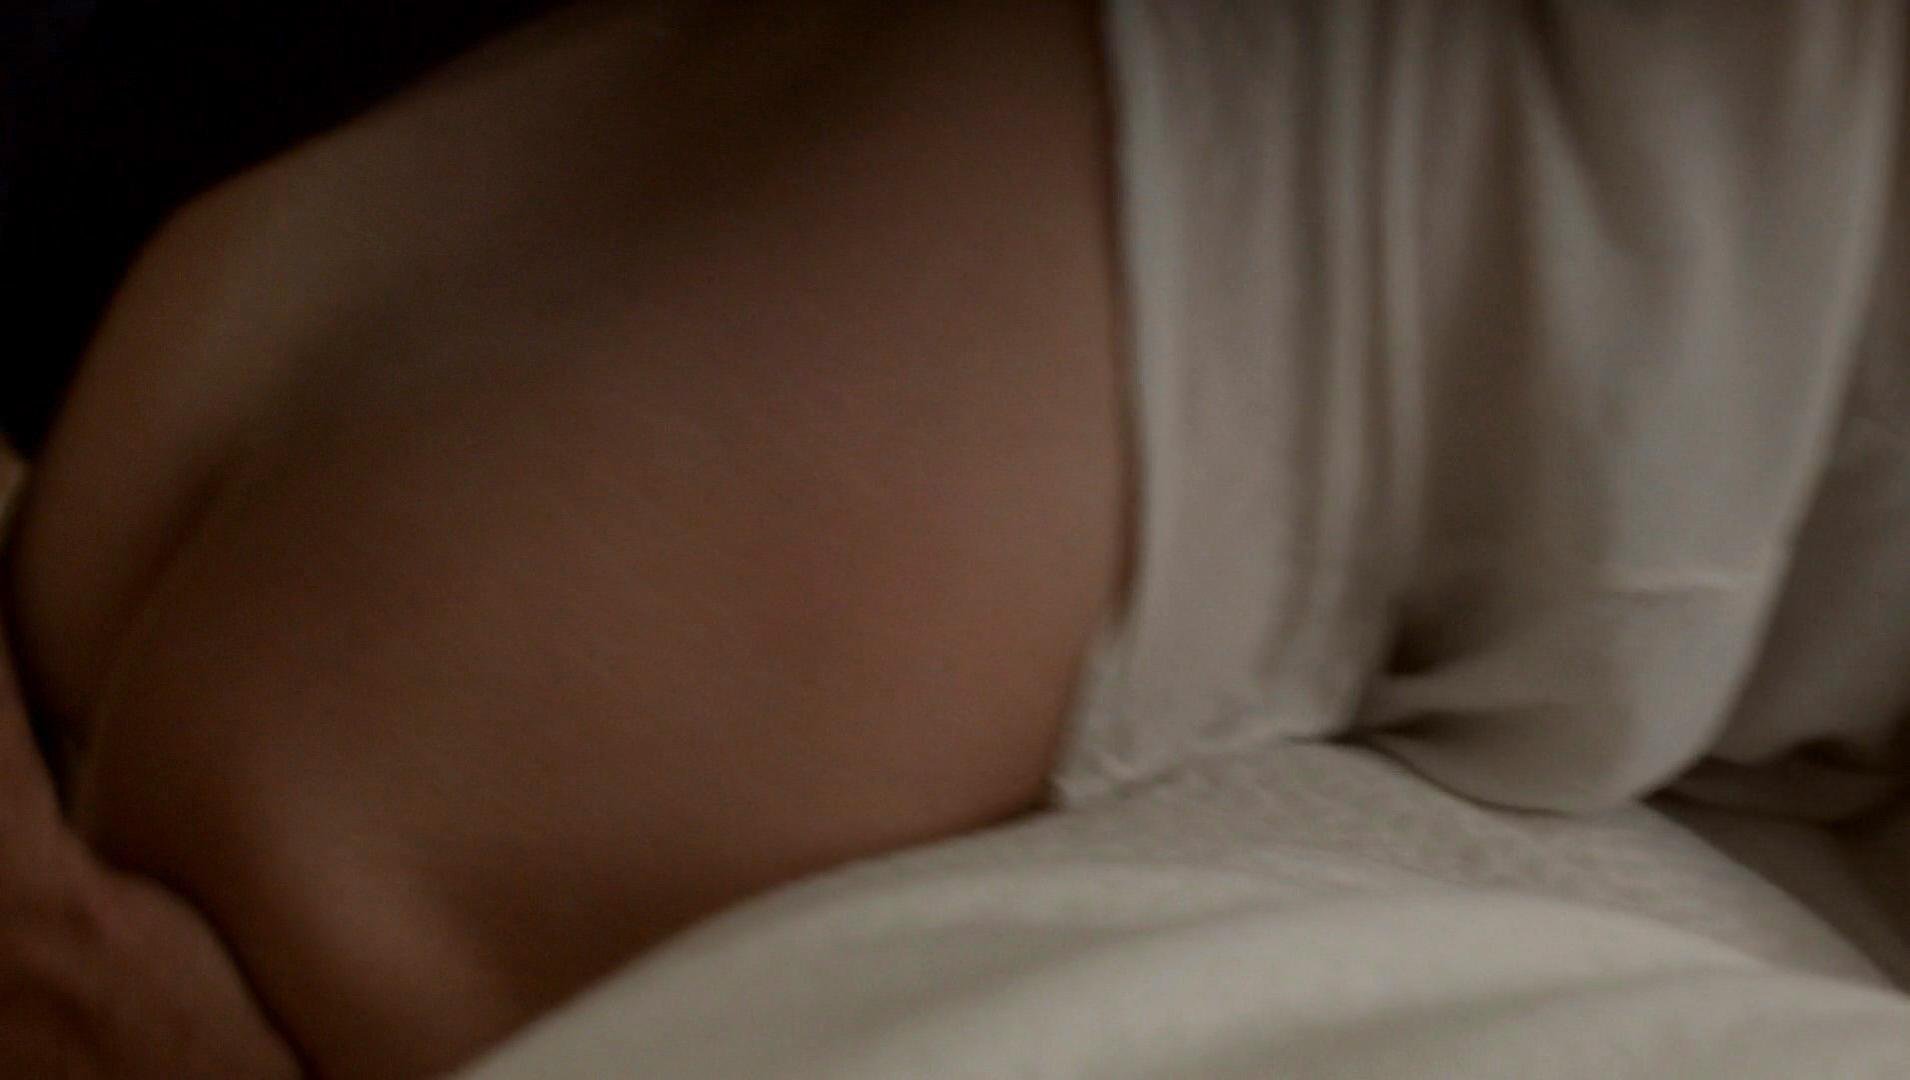 Maura tierney topless